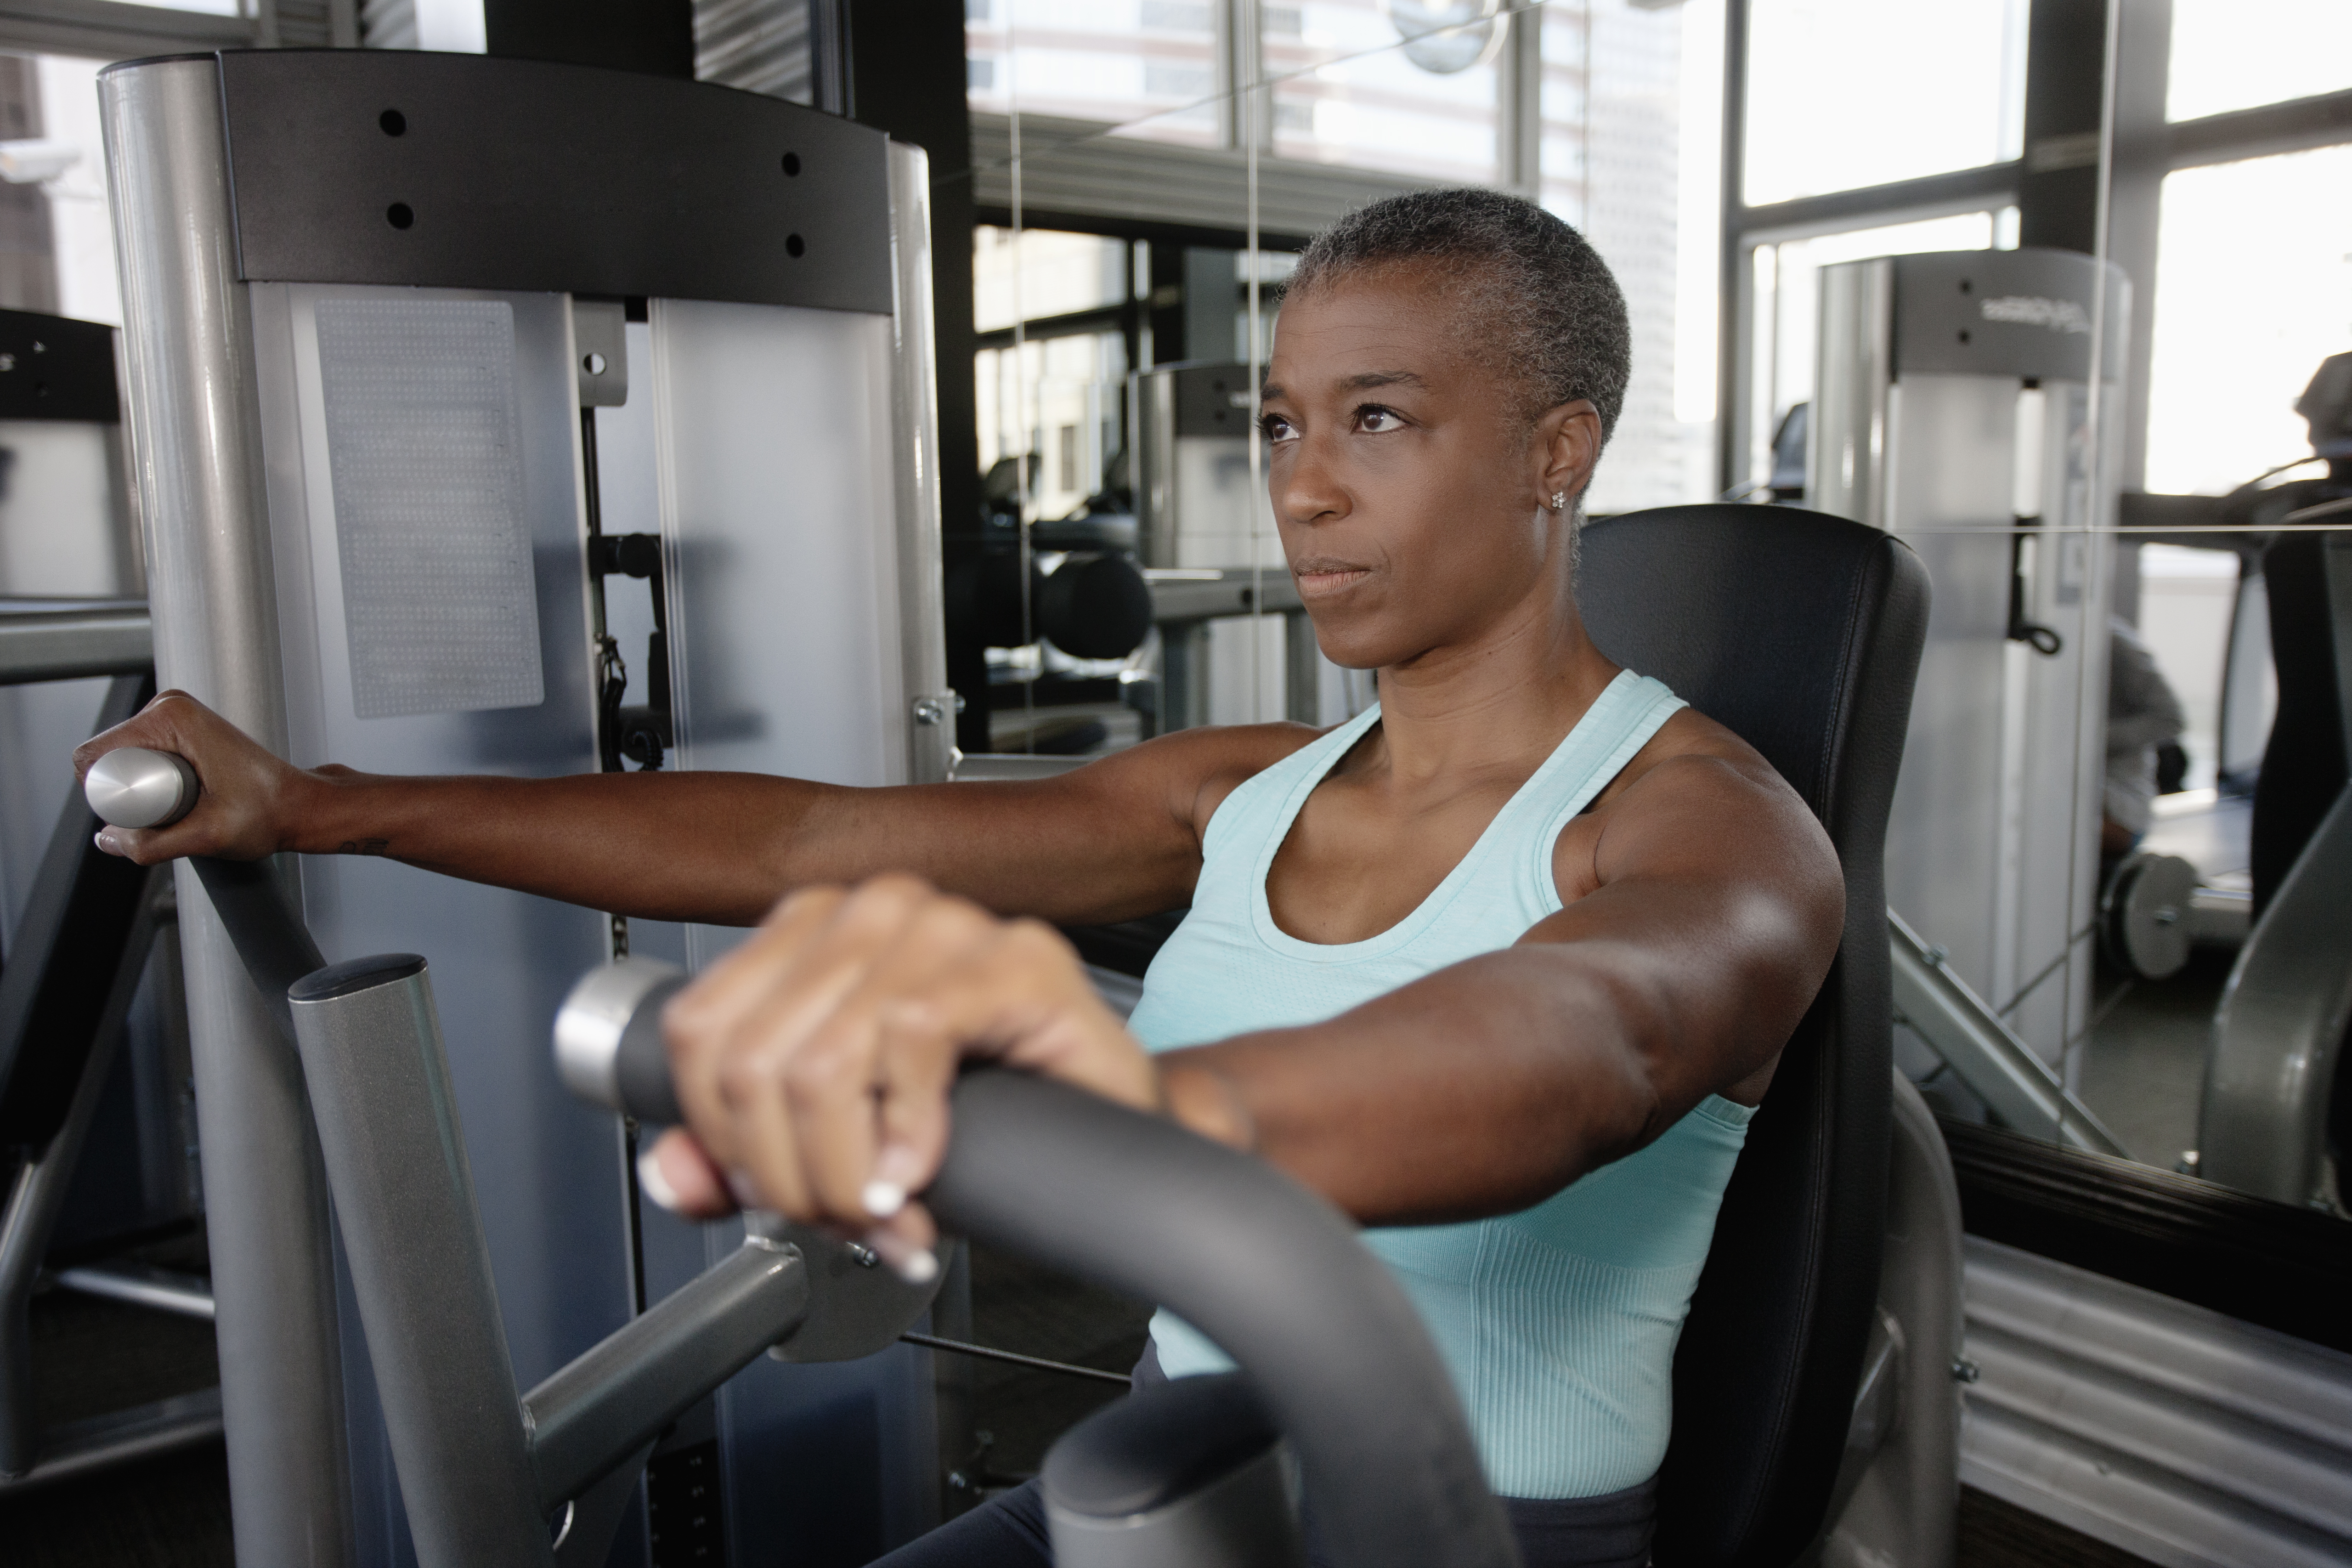 Opinion  Women shouldn't have to feel insecure in the gym